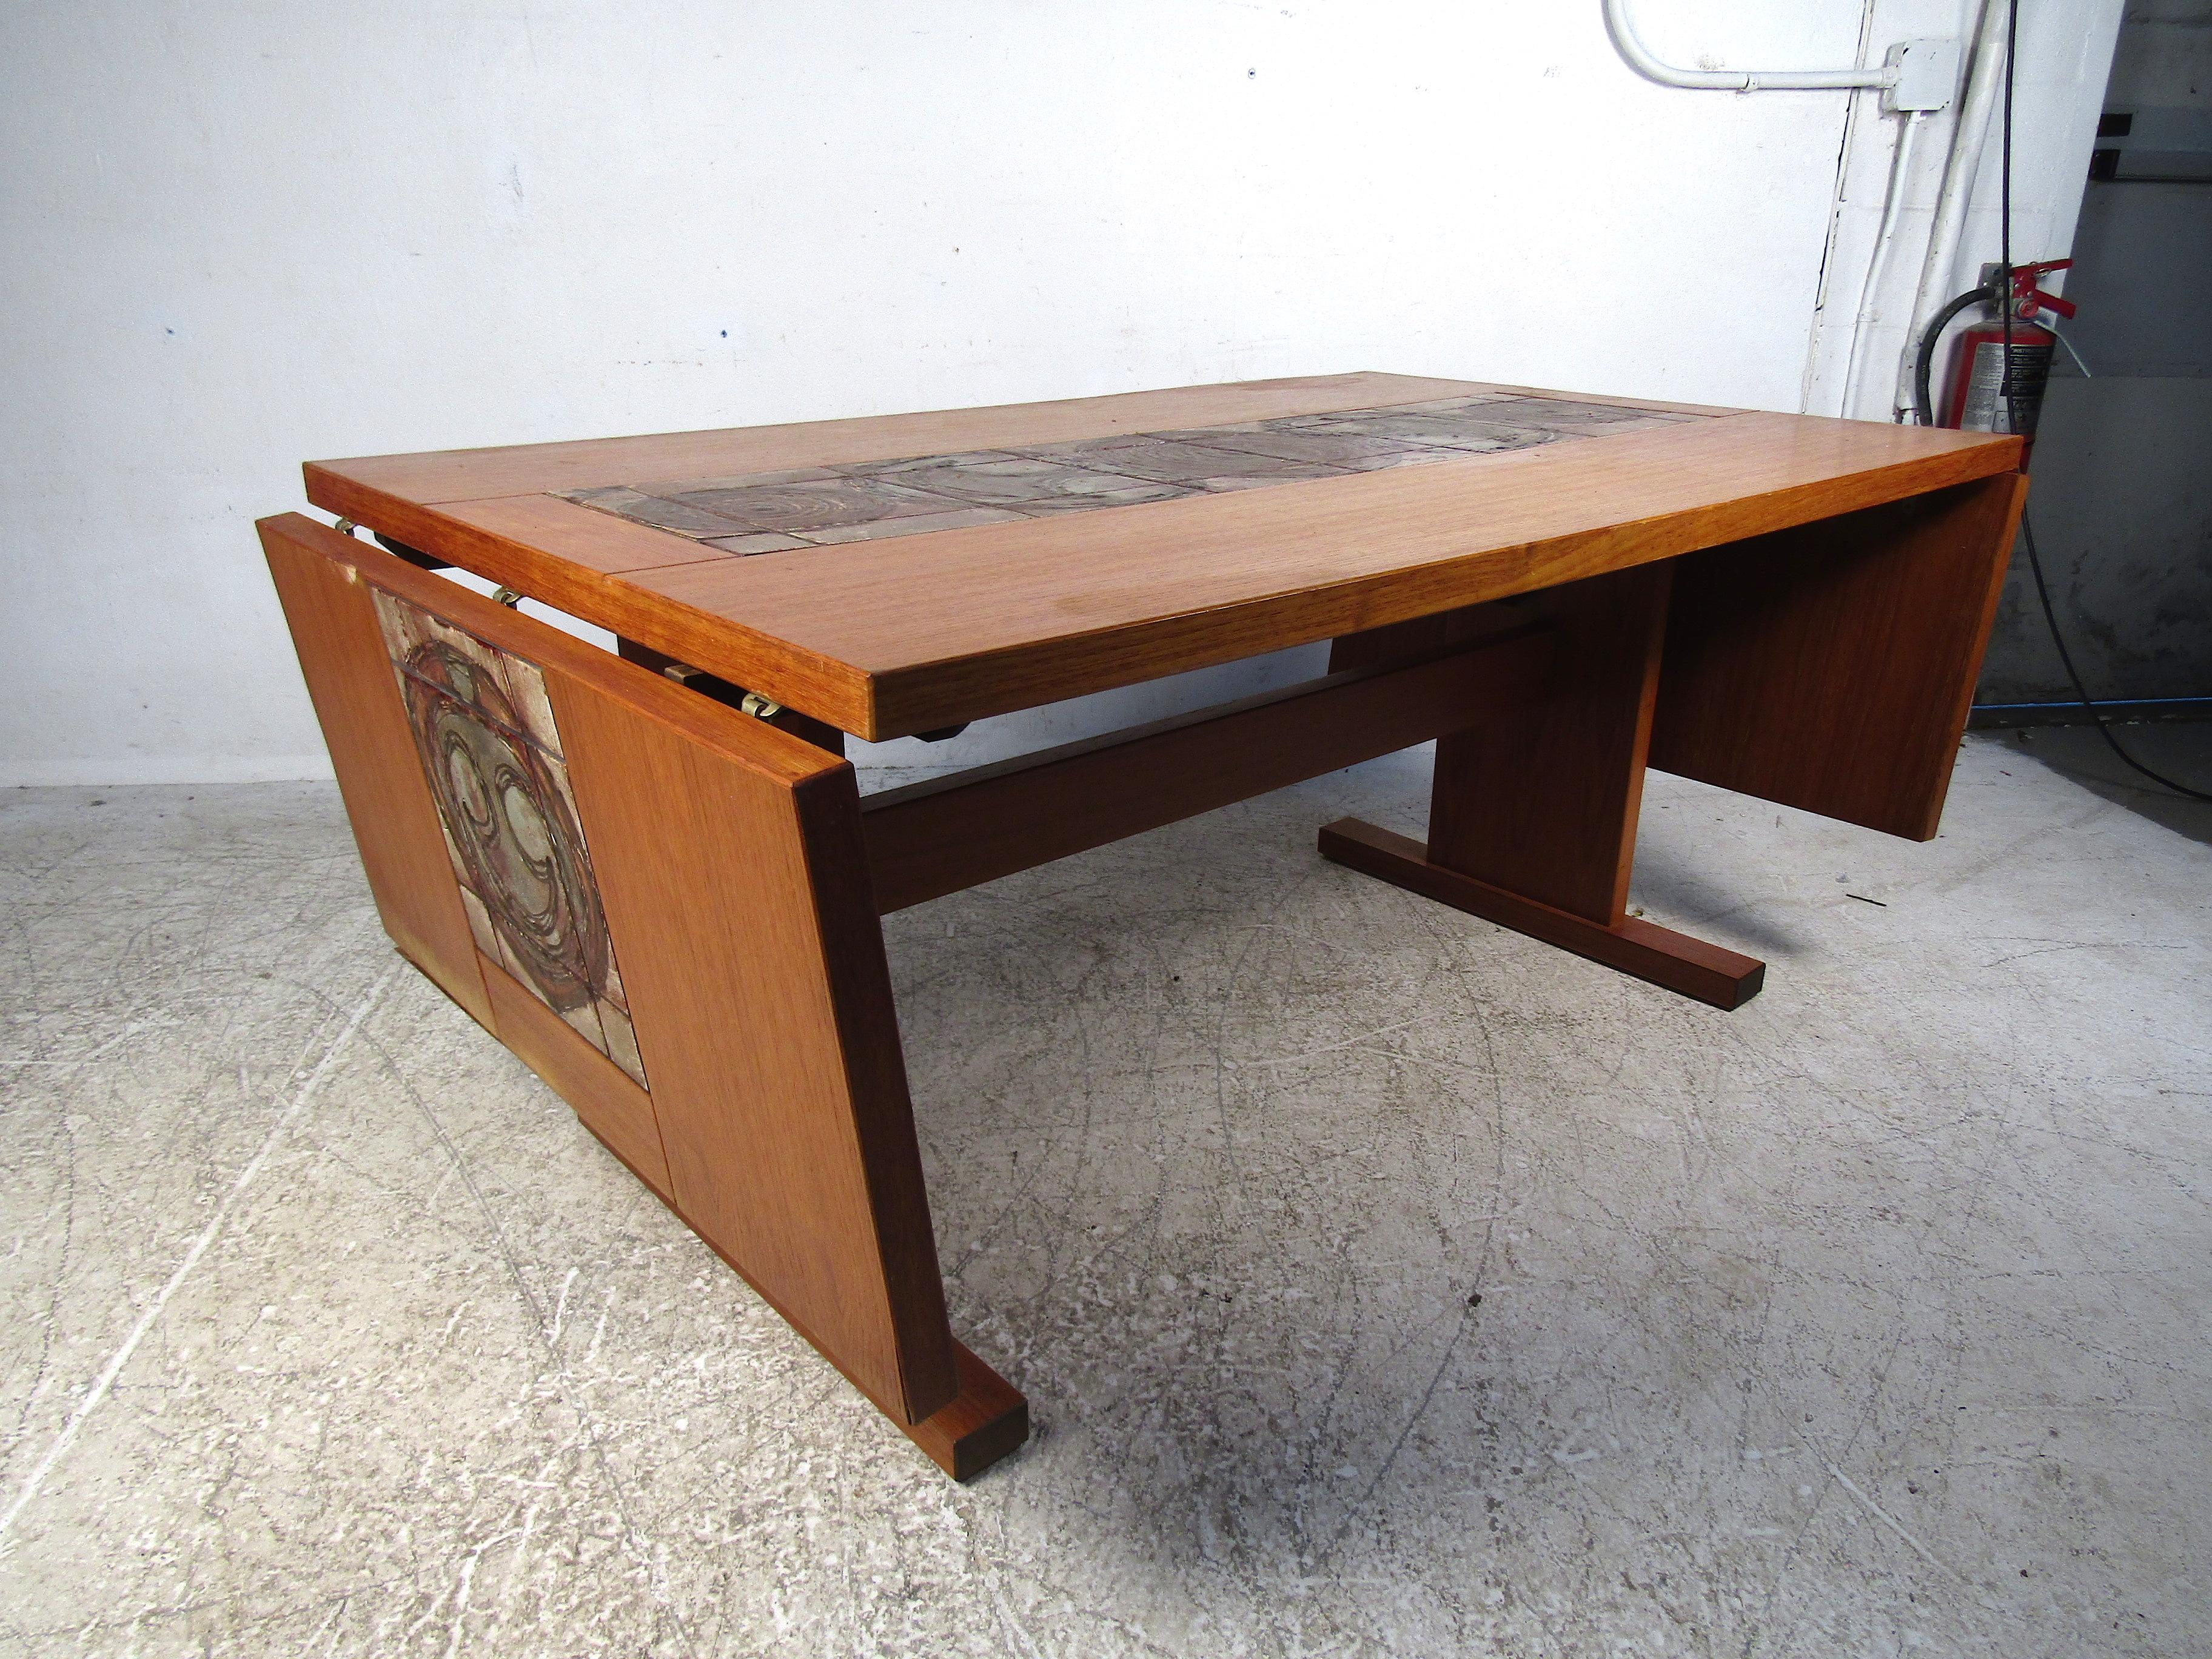 Interesting Danish modern dining table. Two drop-leaf extensions on both ends of the table, with tile inlays matching those on the main table. Leaves extend the table's width from 61 to 96 inches. Please confirm item location with dealer (NJ or NY).